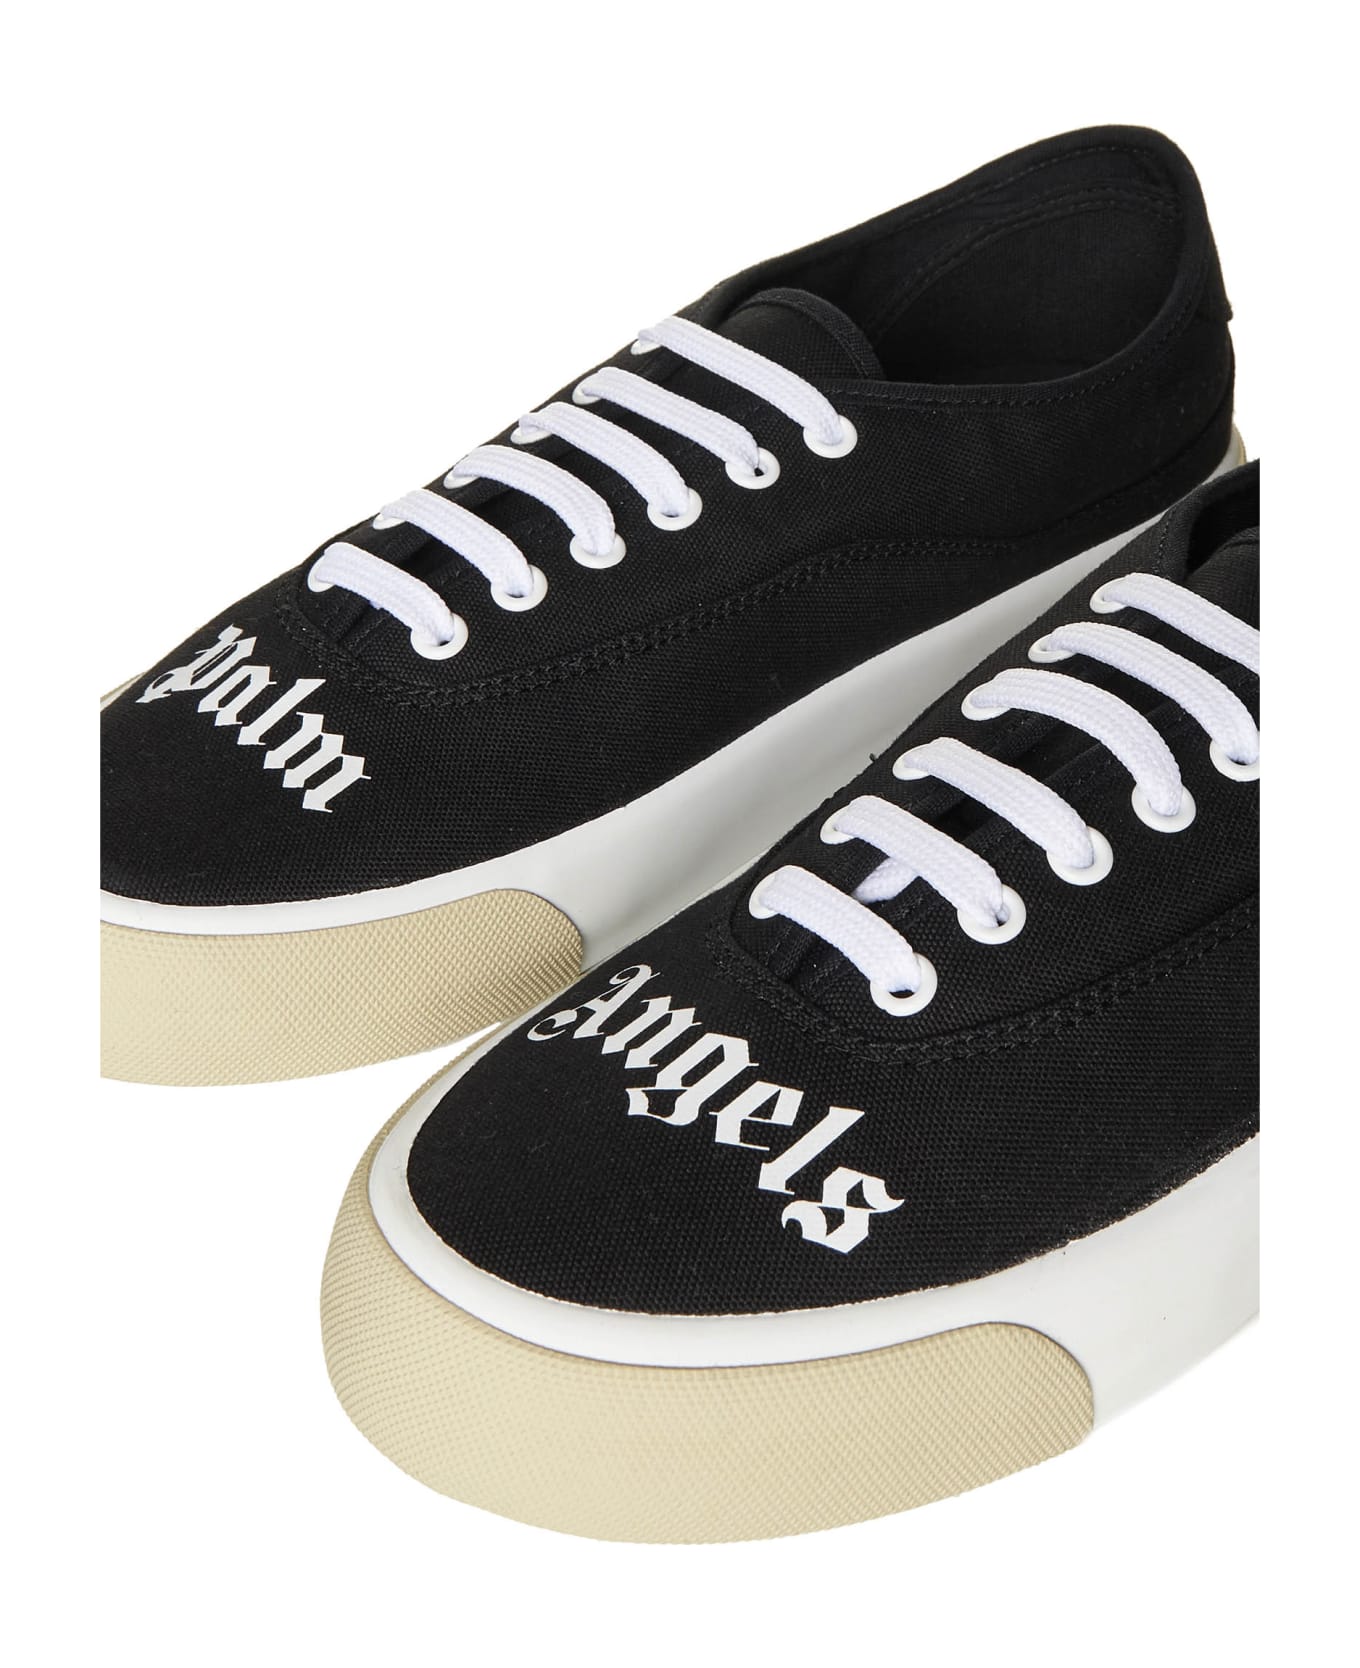 Palm Angels Logo Printed Lace-up Sneakers - Black white スニーカー